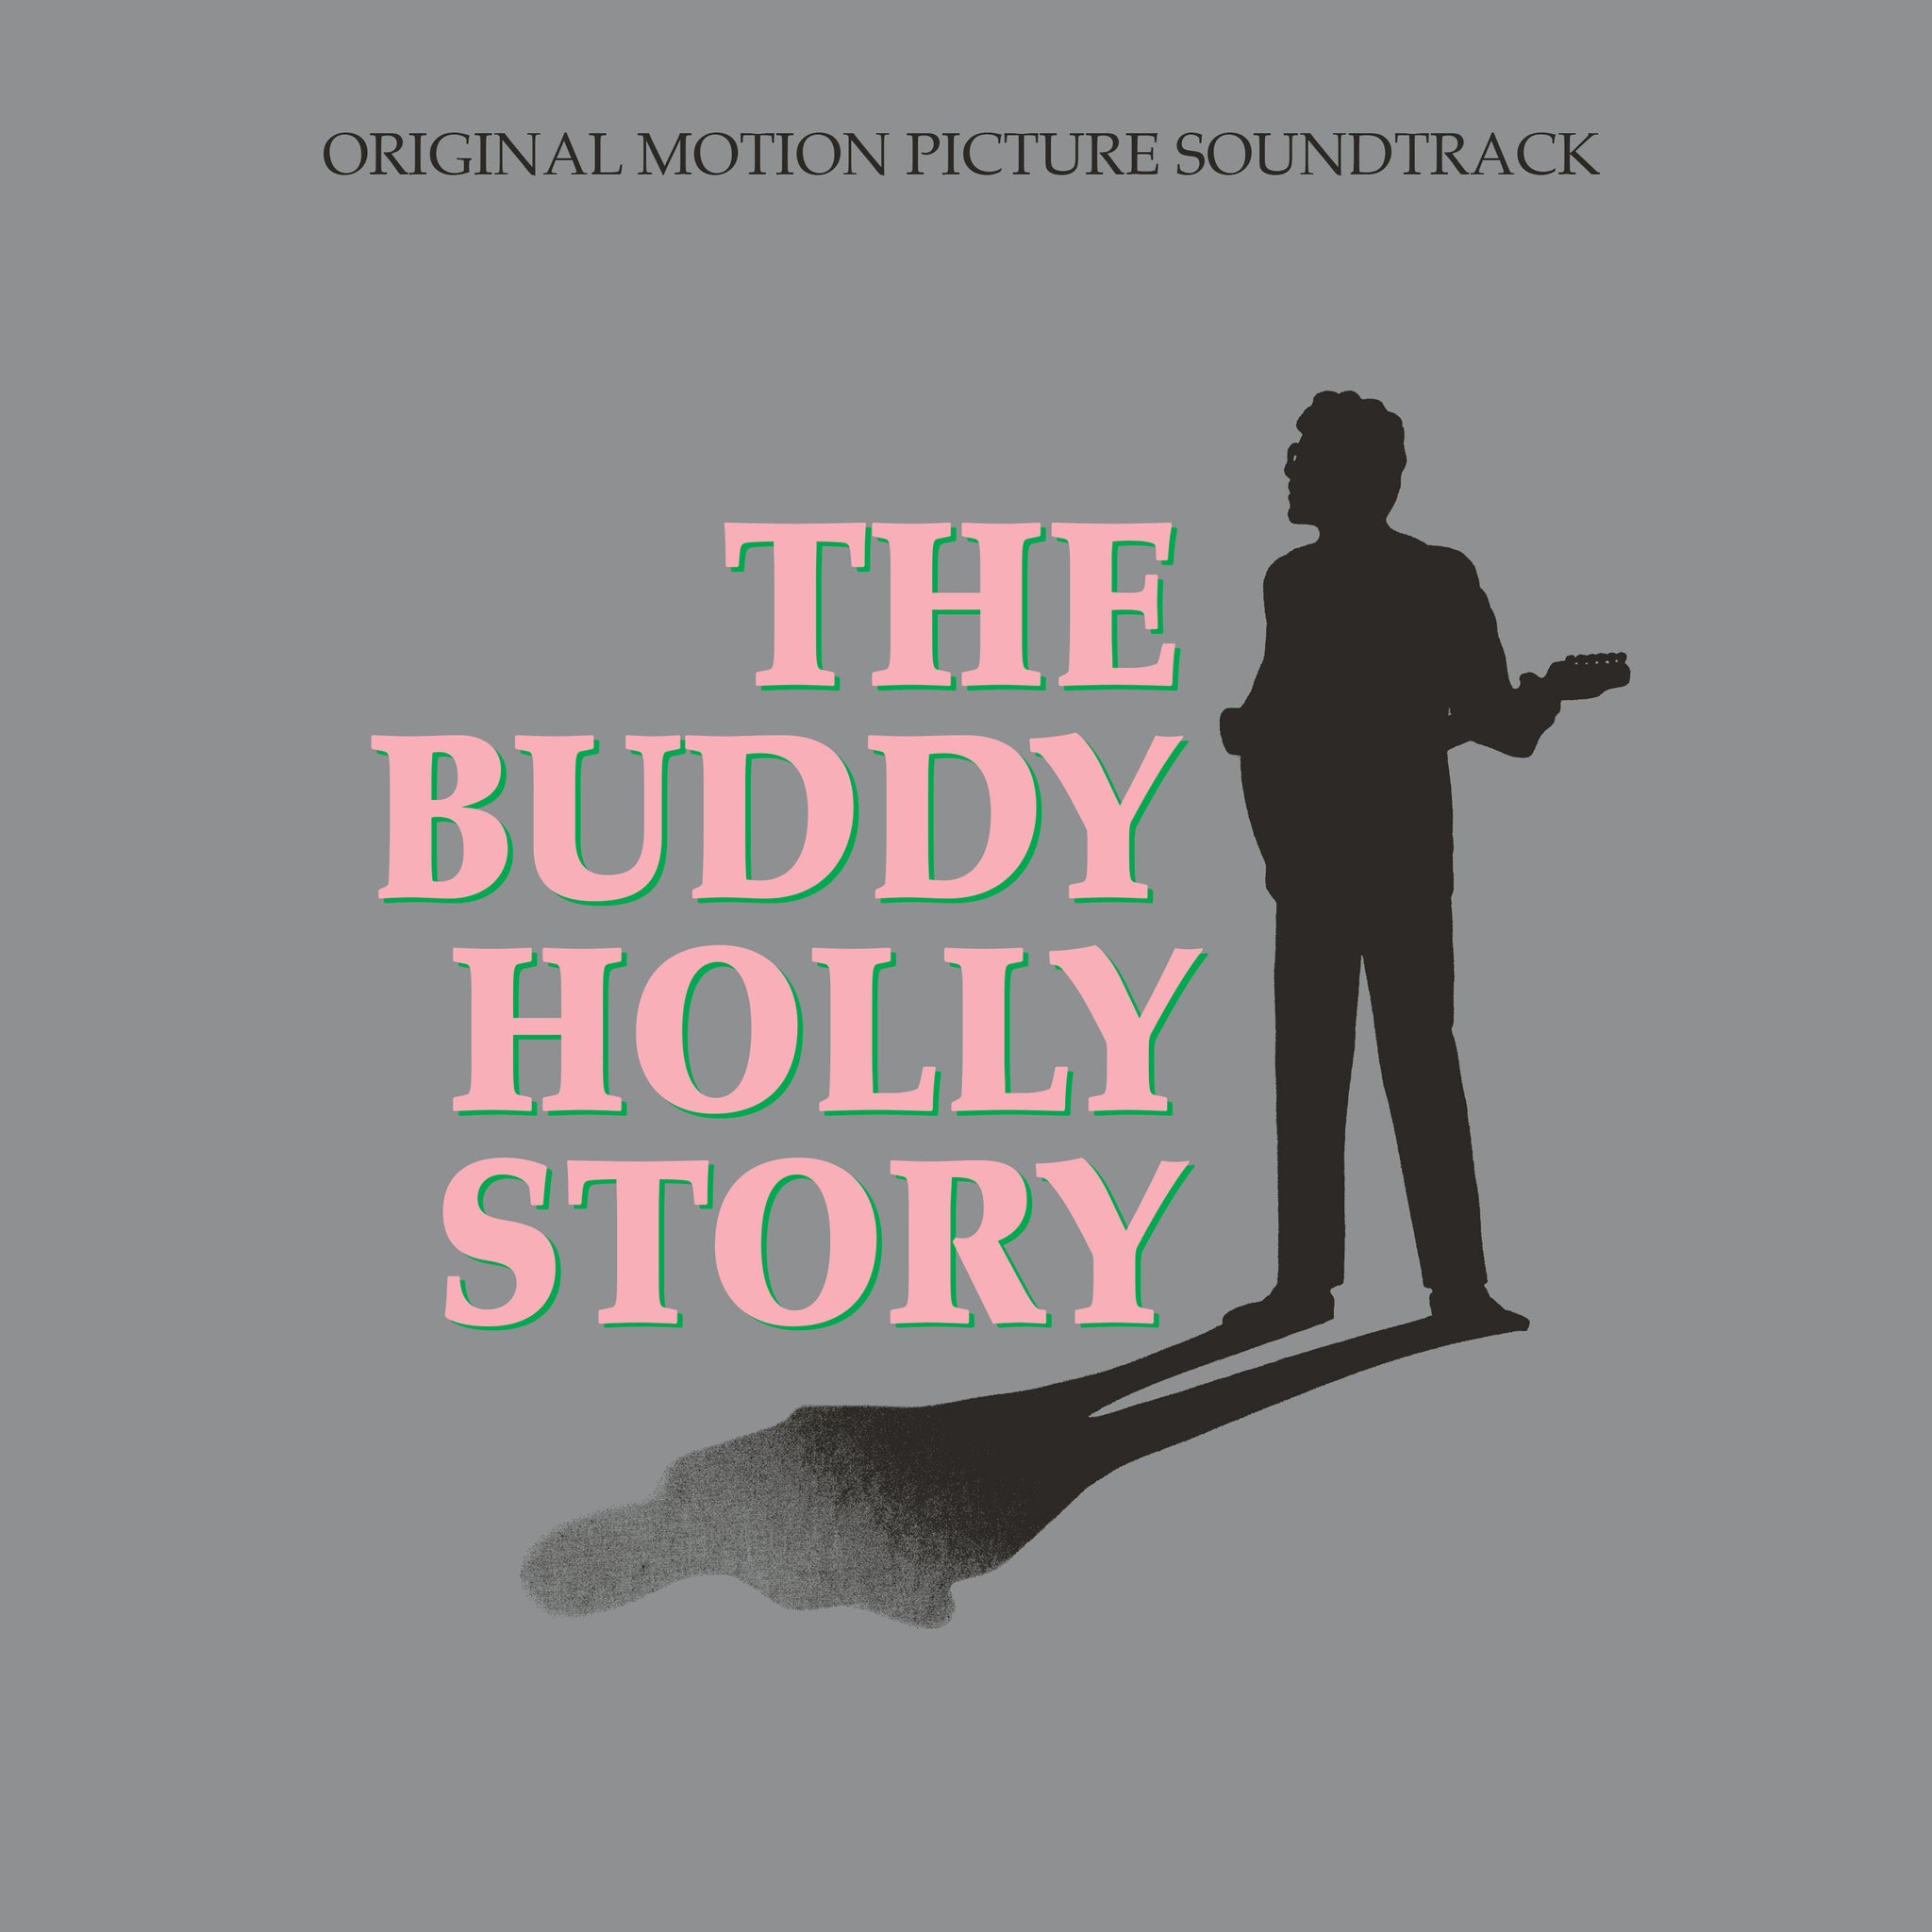 Buddy_Holly_Story_OMPST_COVER_TO_SPEC_20